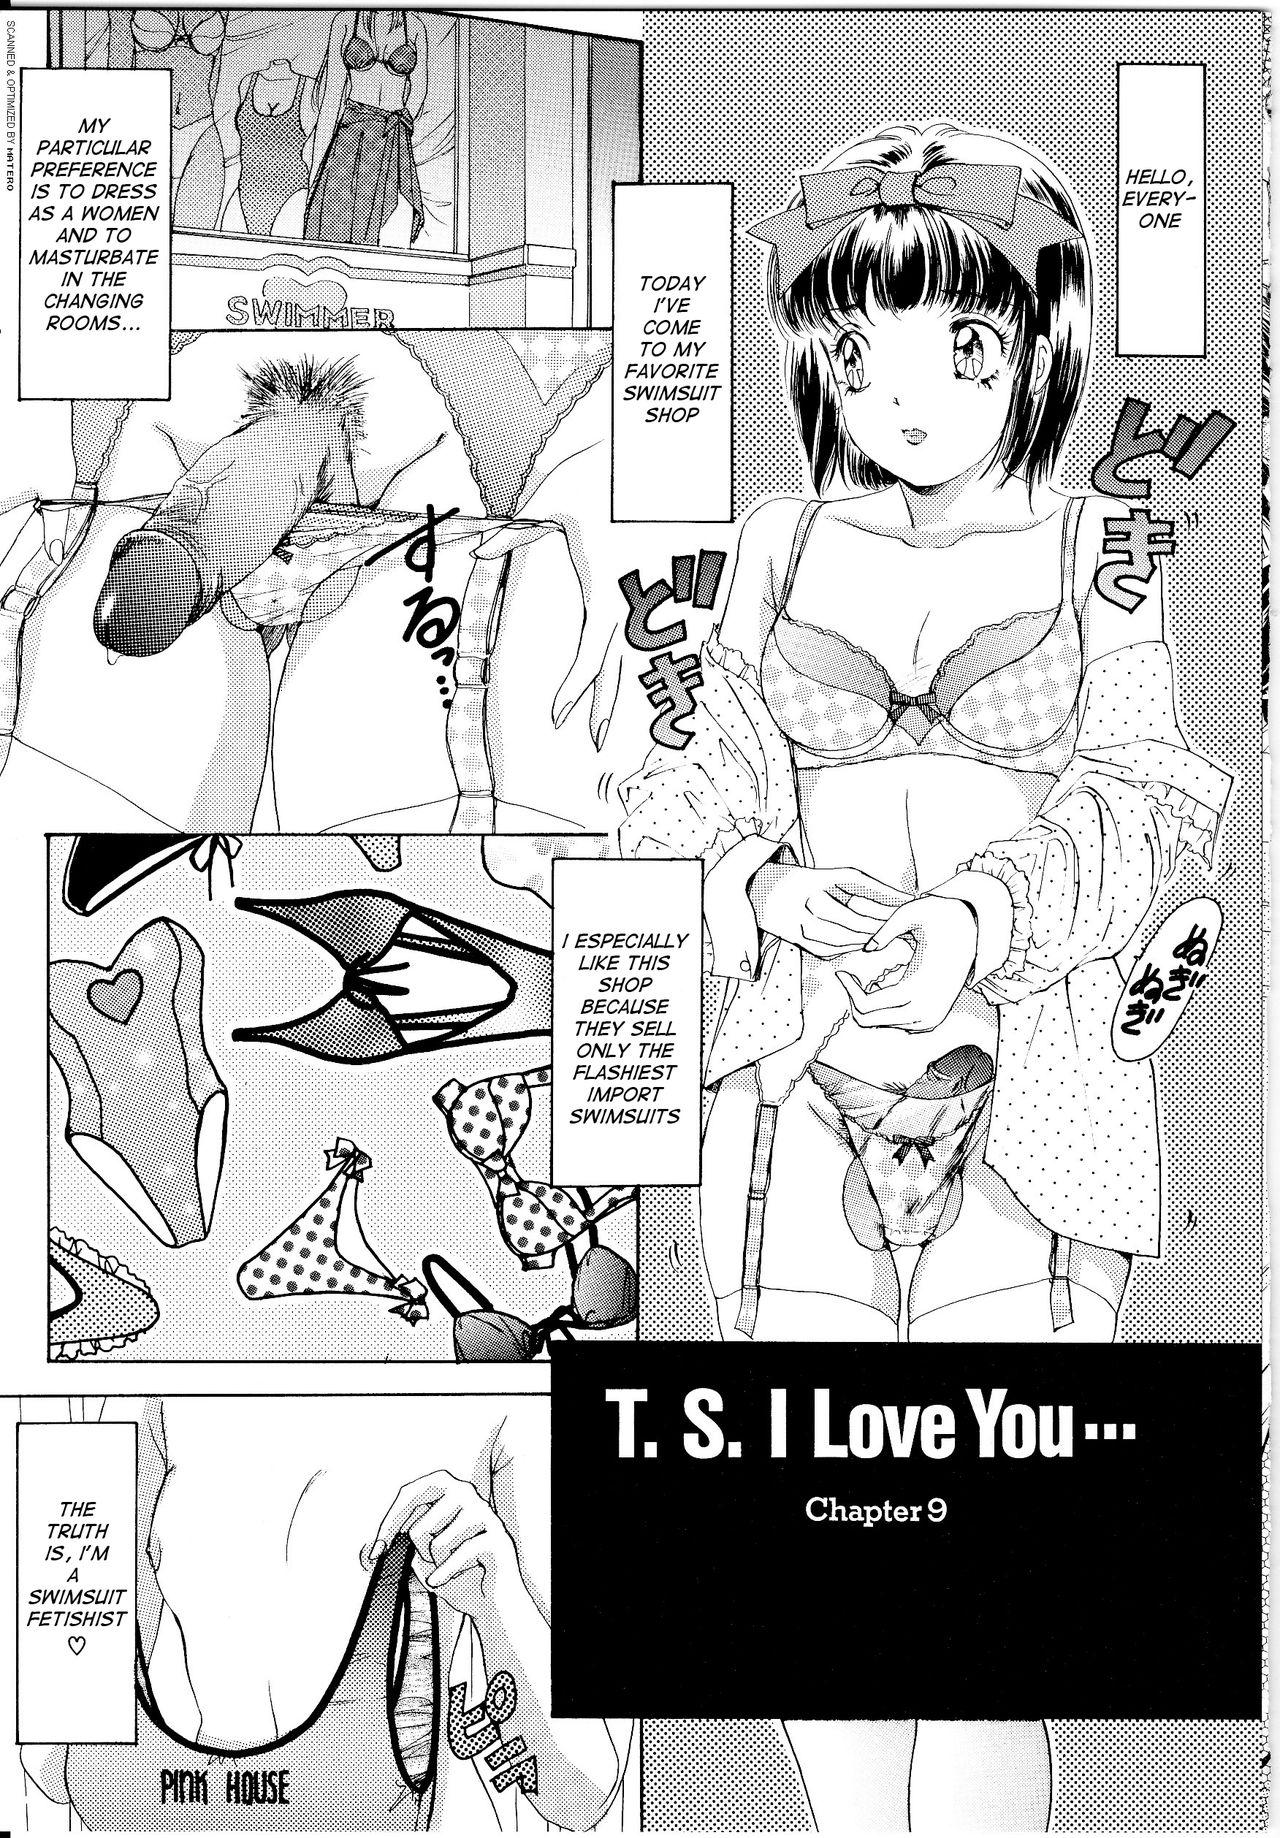 T.S. I LOVE YOU... 1 Ch. 9 0